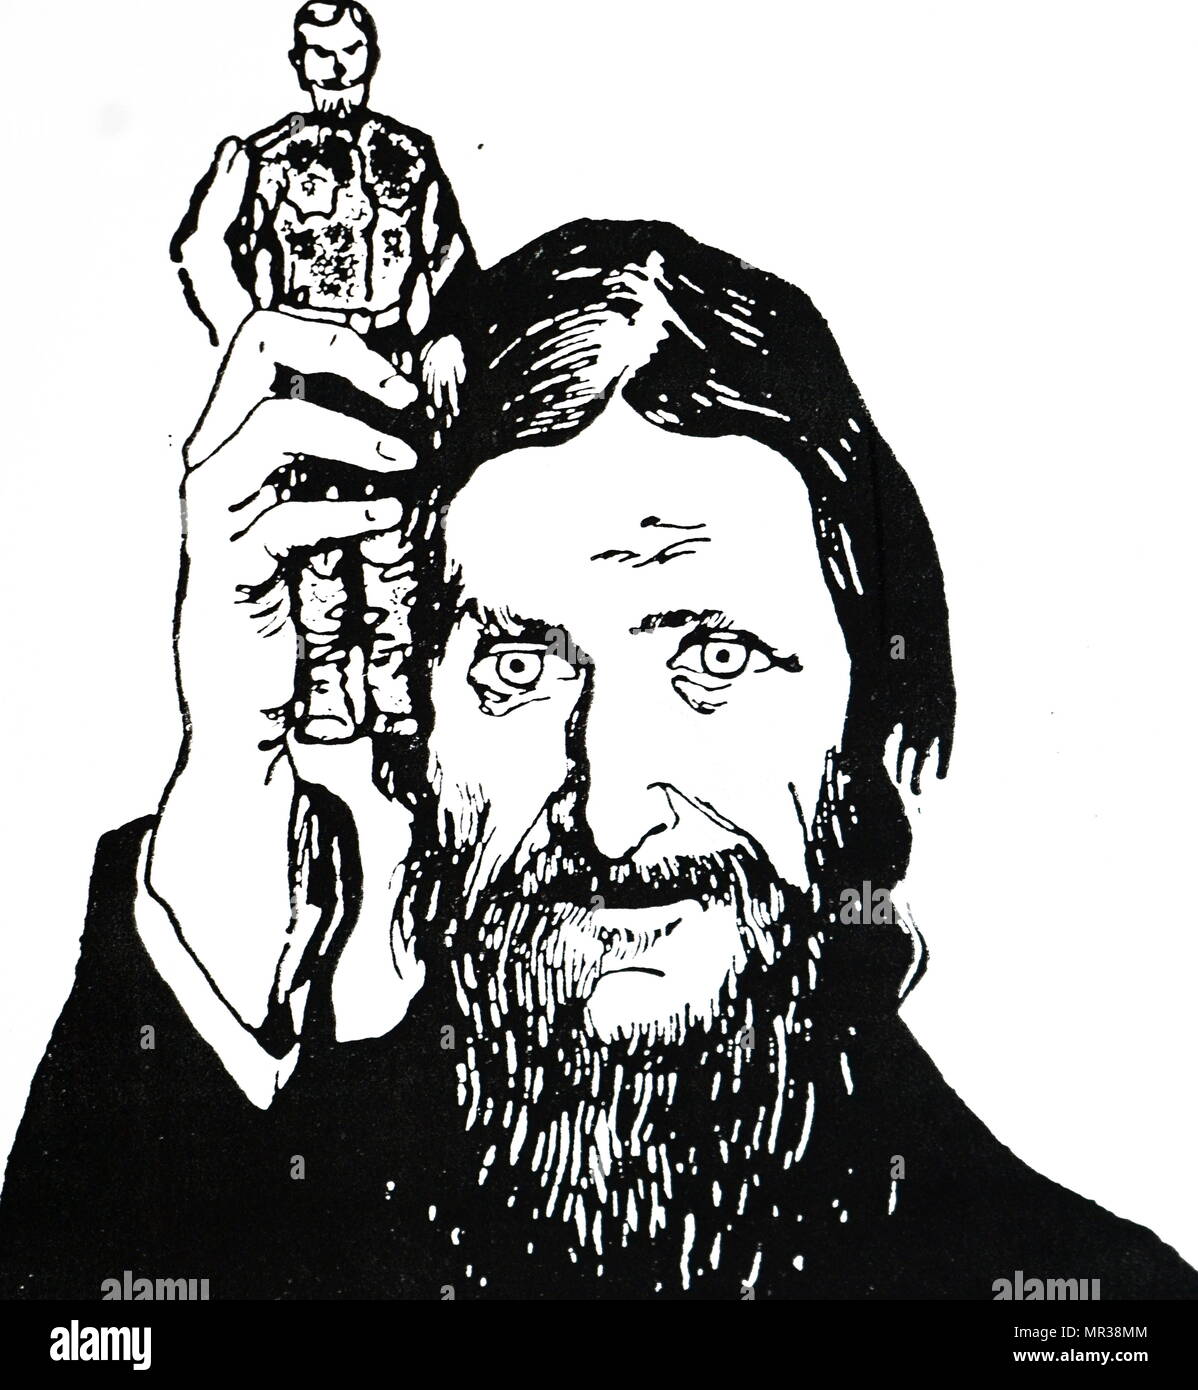 Caricature of Grigori Rasputin clutching Nicholas II. The cartoon is commenting on the control Rasputin holds over the royal family. Grigori Rasputin (1869-1916) a Russian mystic and self-proclaimed holy man who befriended the family of Tsar Nicholas II and gained considerable influence in late imperial Russia. Dated 20th century Stock Photo